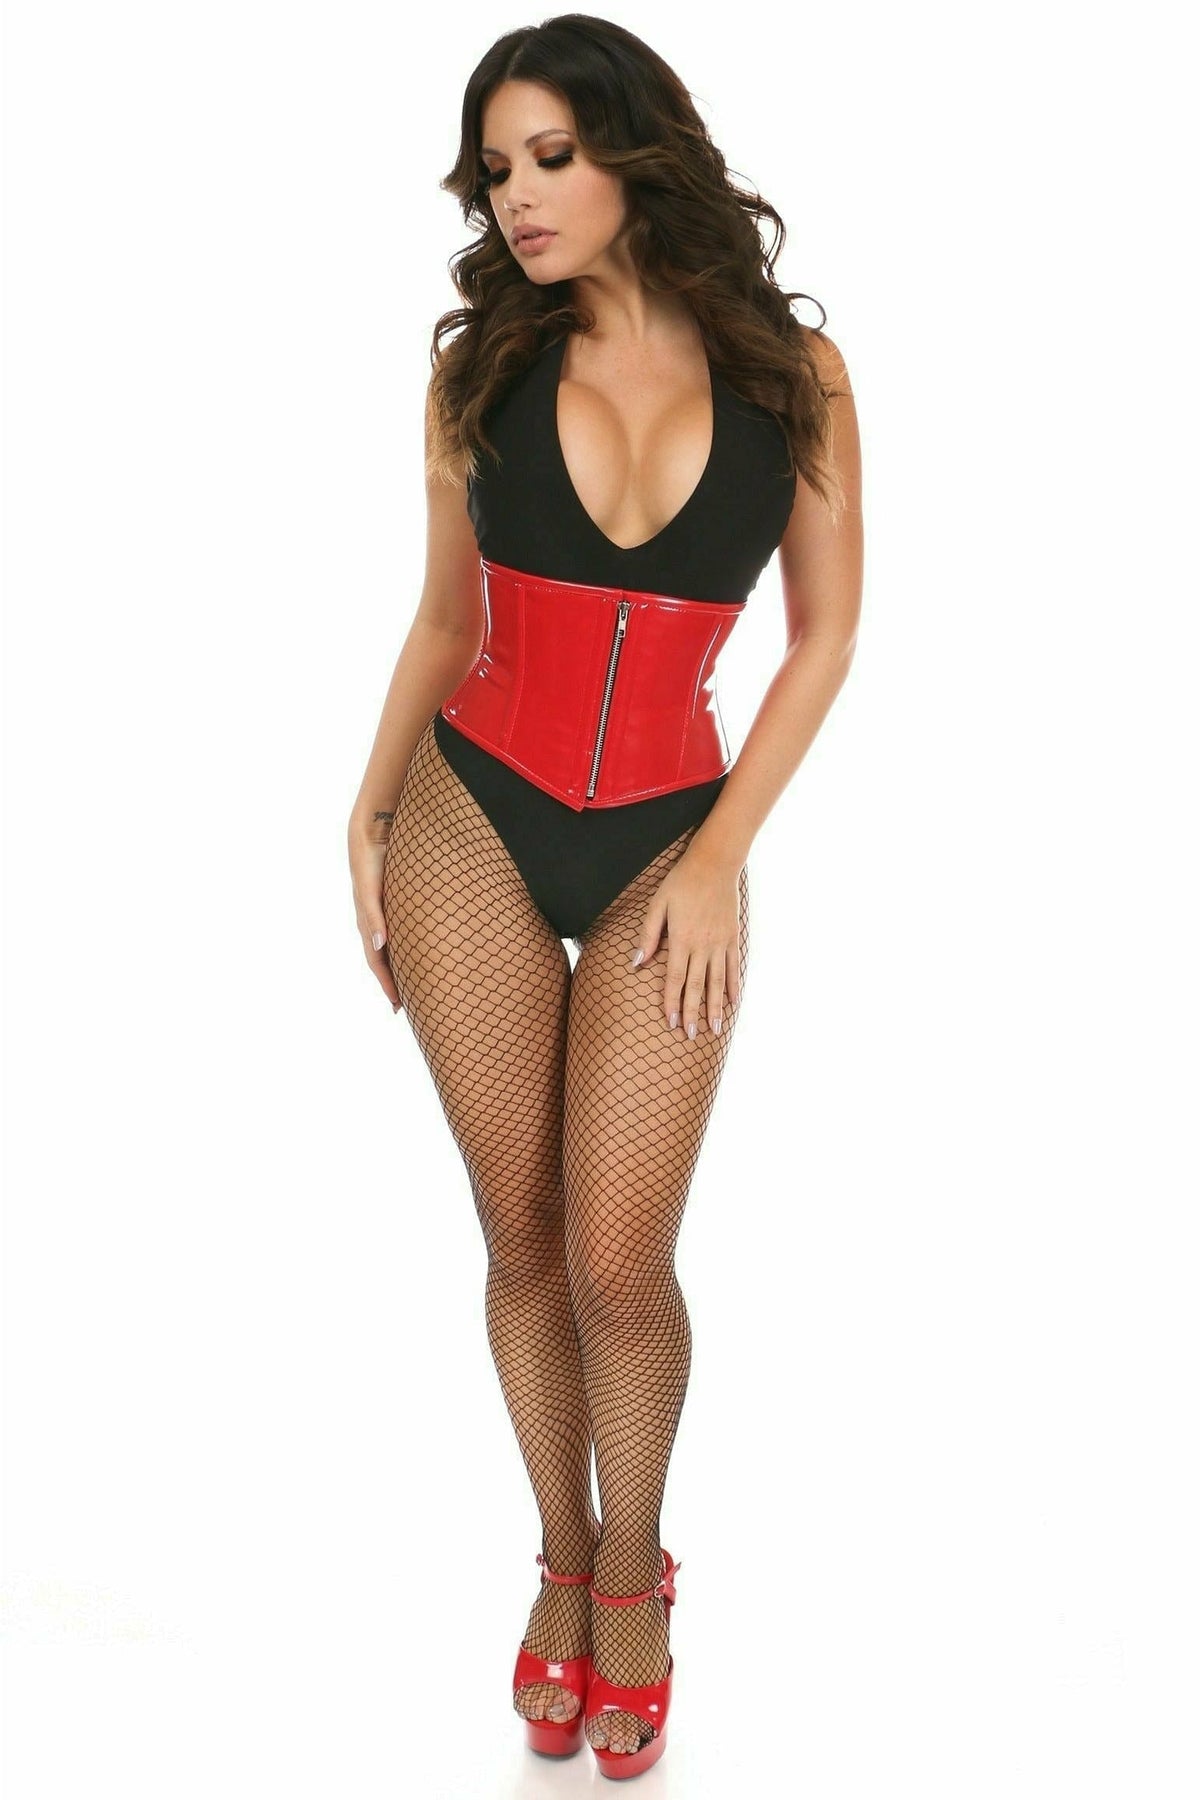 Top Drawer Red Patent Steel Boned Mini Cincher-Daisy Corsets